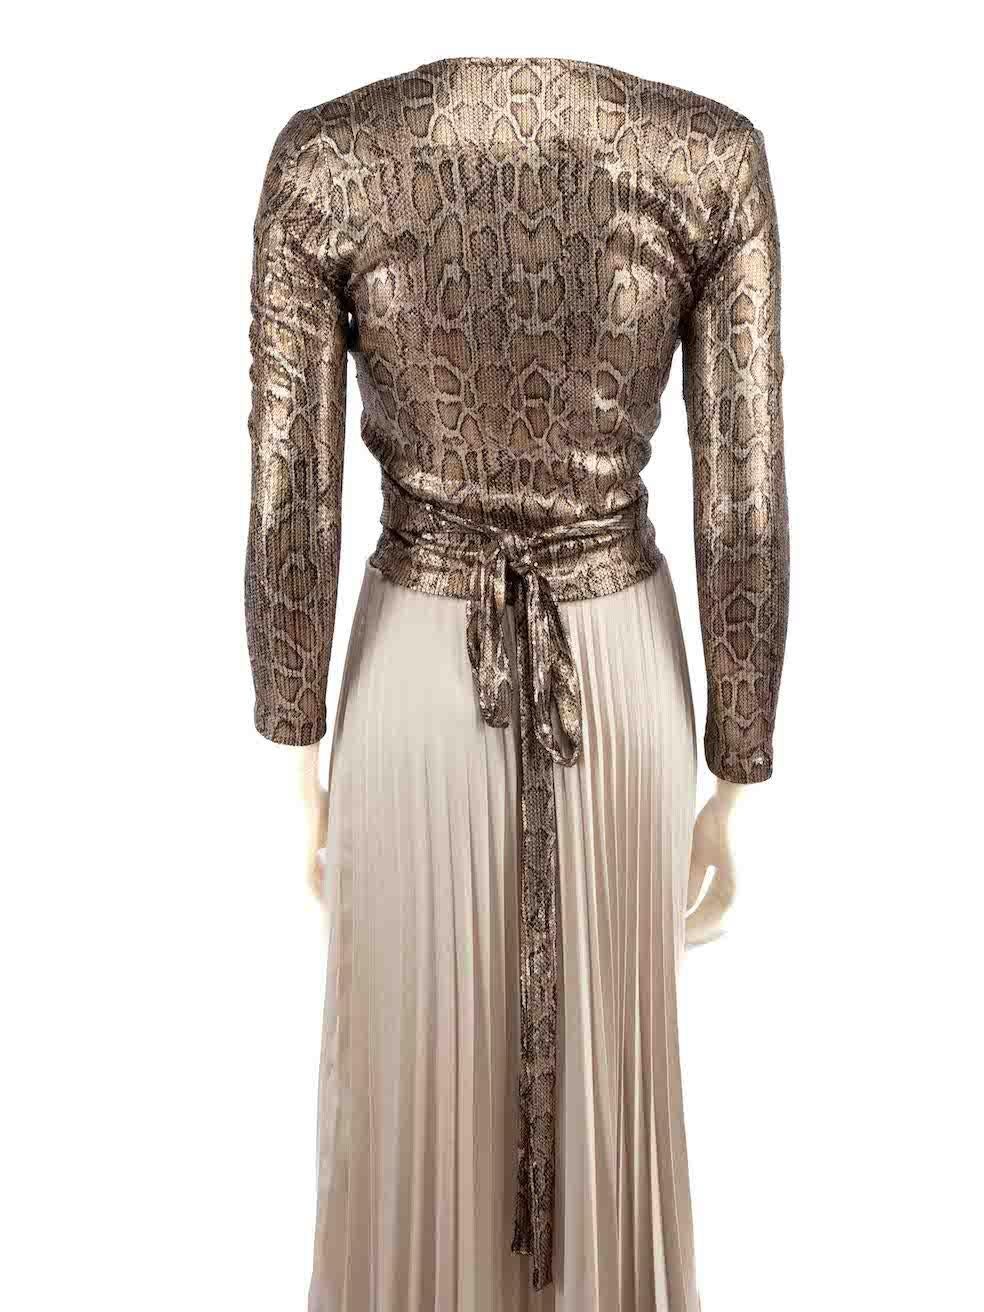 Saint Laurent Brown Snakeskin Sequin Wrap Top Size M In Good Condition For Sale In London, GB